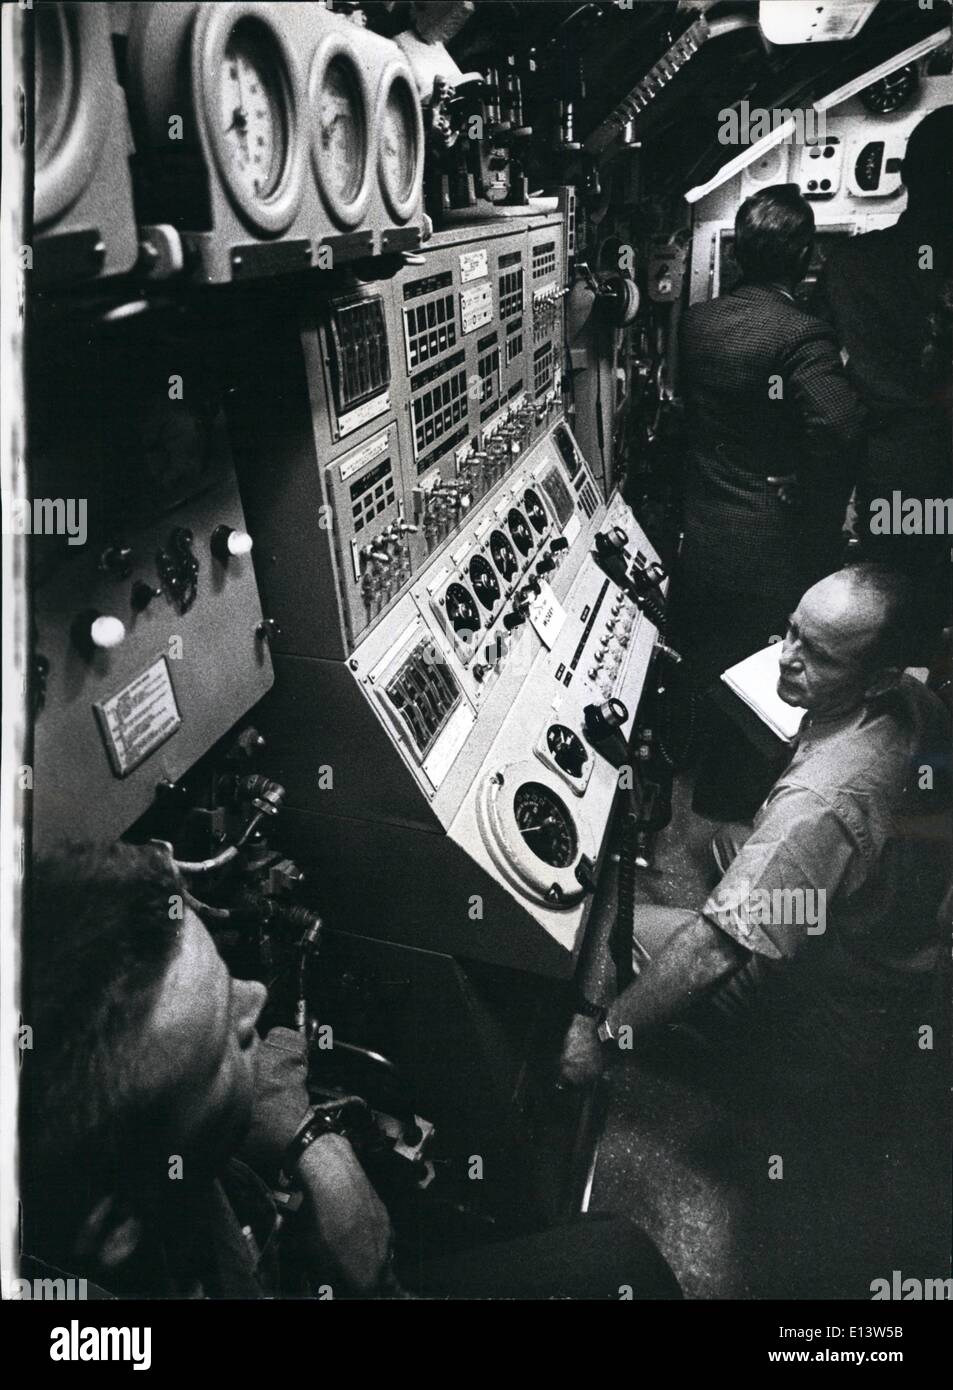 Mar. 27, 2012 - Part Of The ''Brain Box'' Of AK/Tom Sub: The control Room of Scorpion showing the control panel with its mass of buttons, handles and control levers for the ballast tanks. Stock Photo